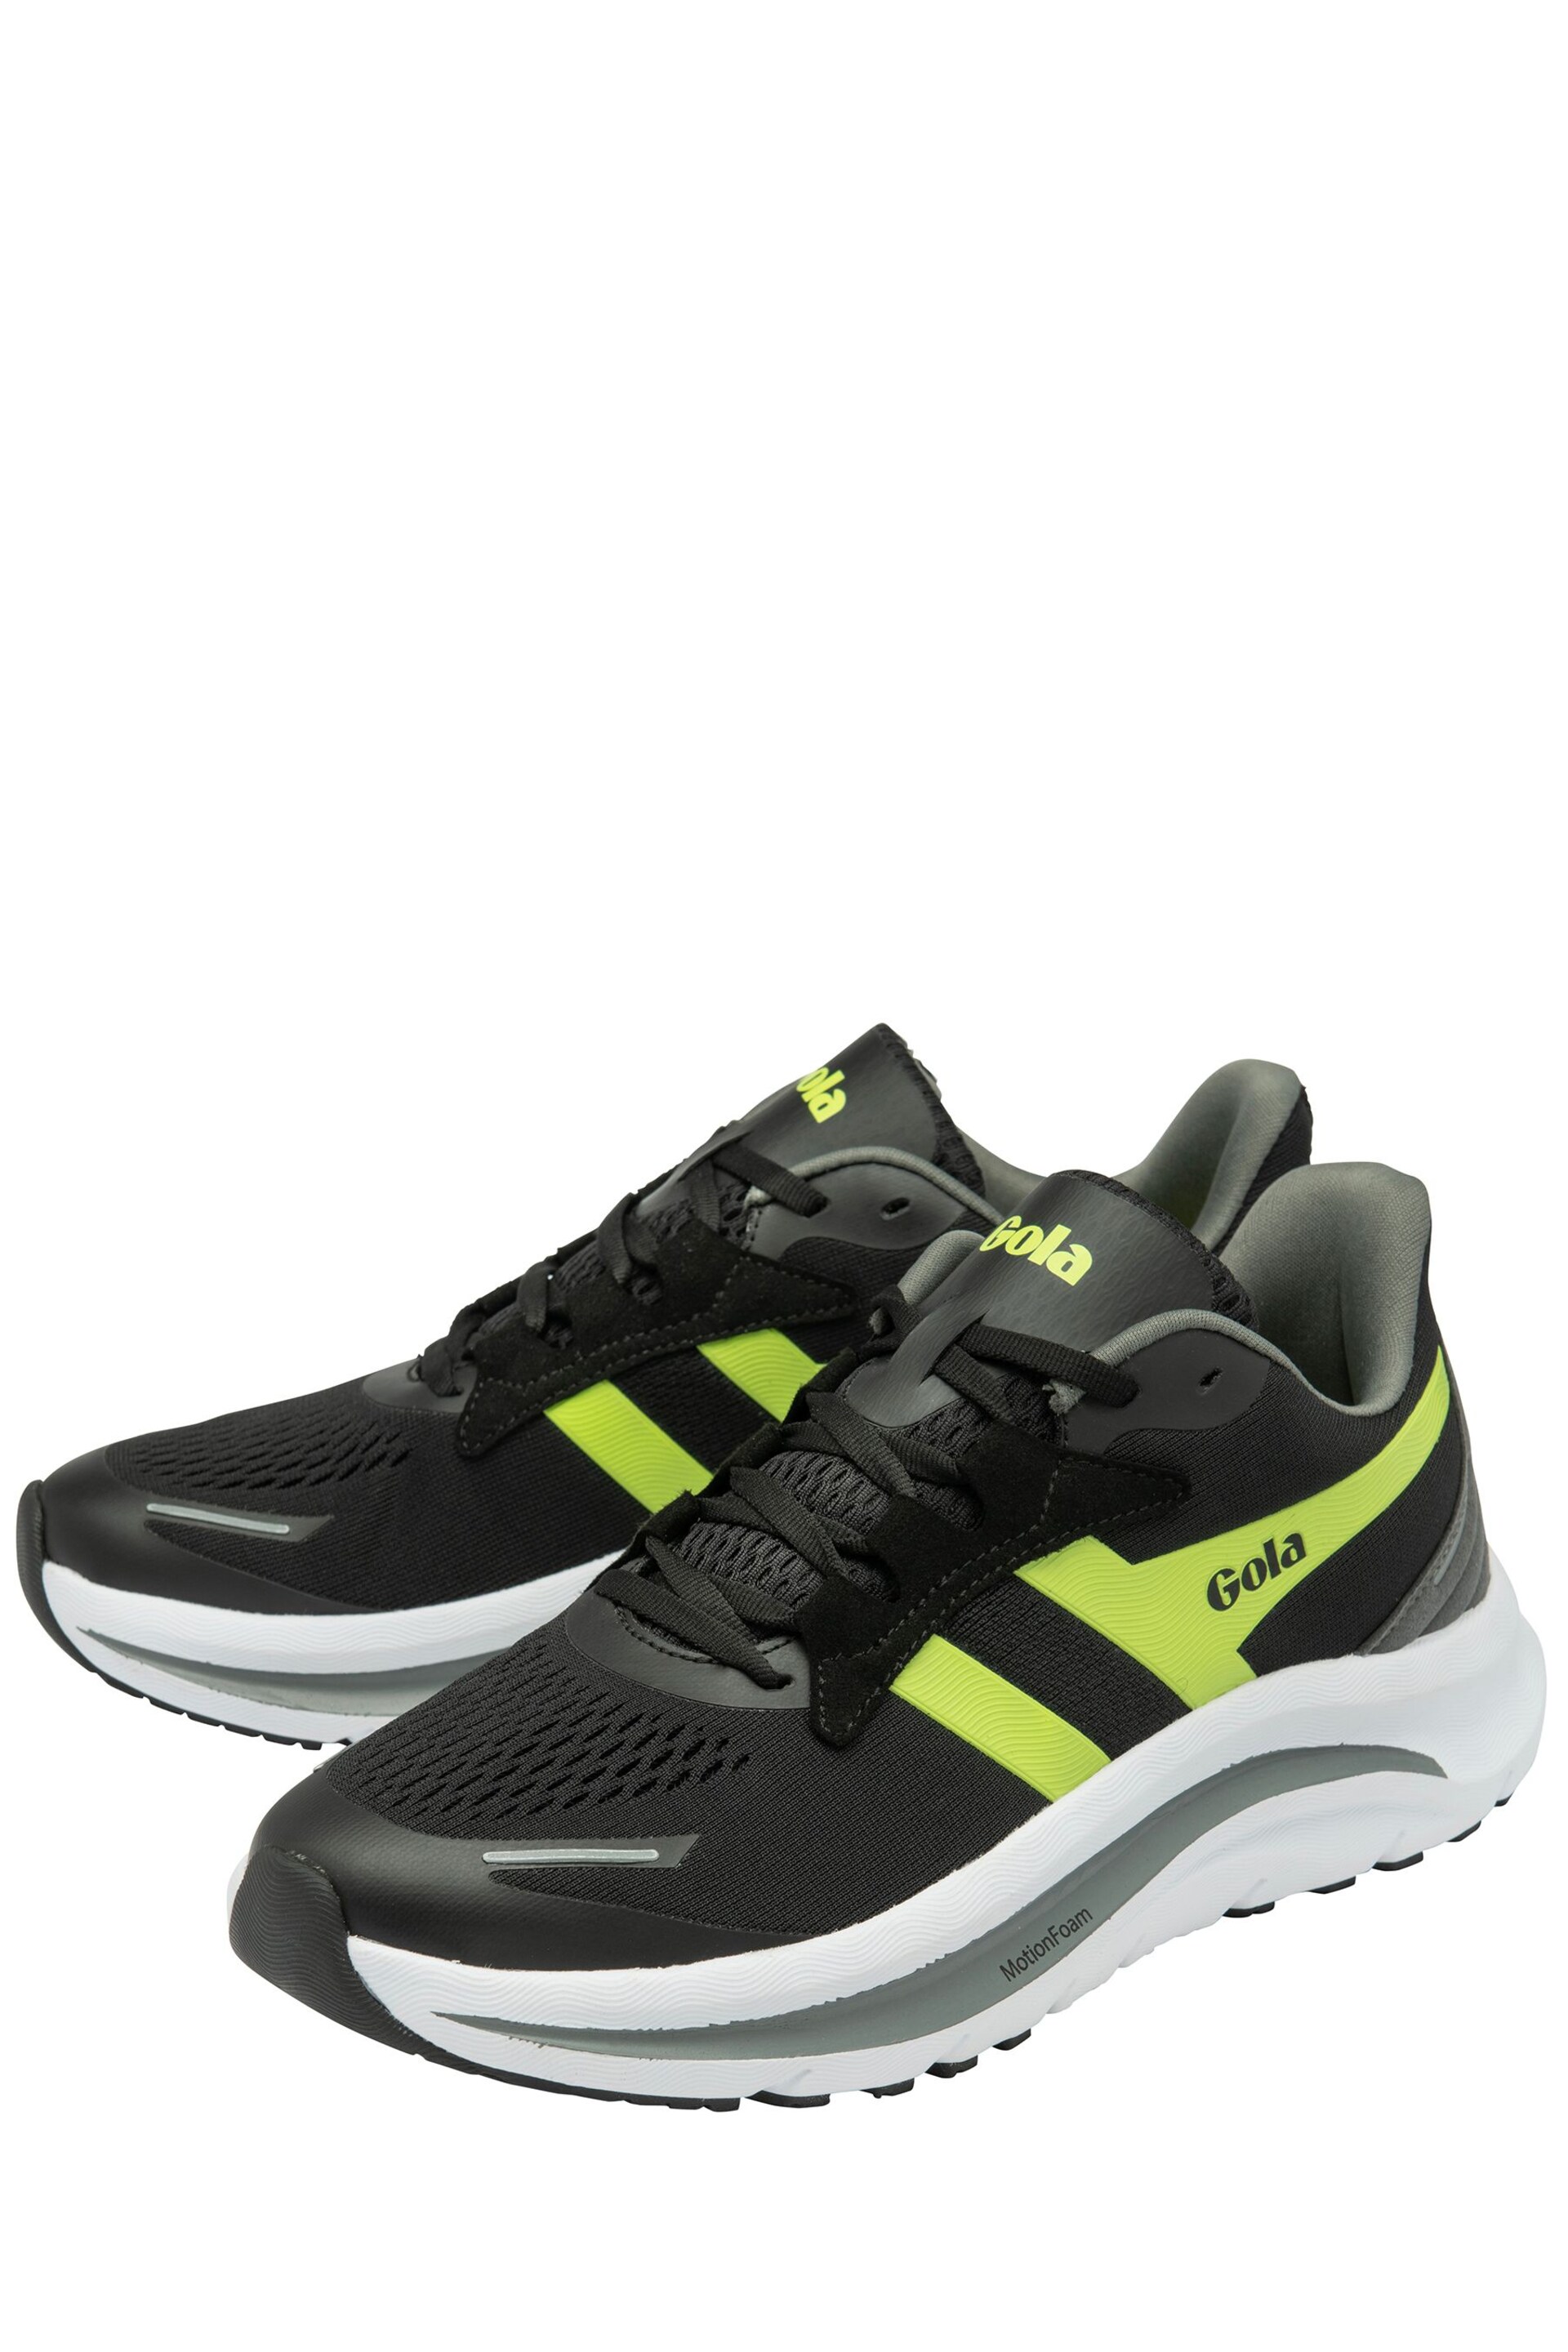 Gola Black Veris Tempo Mesh Lace-Up Mens Running Trainers - Image 2 of 4